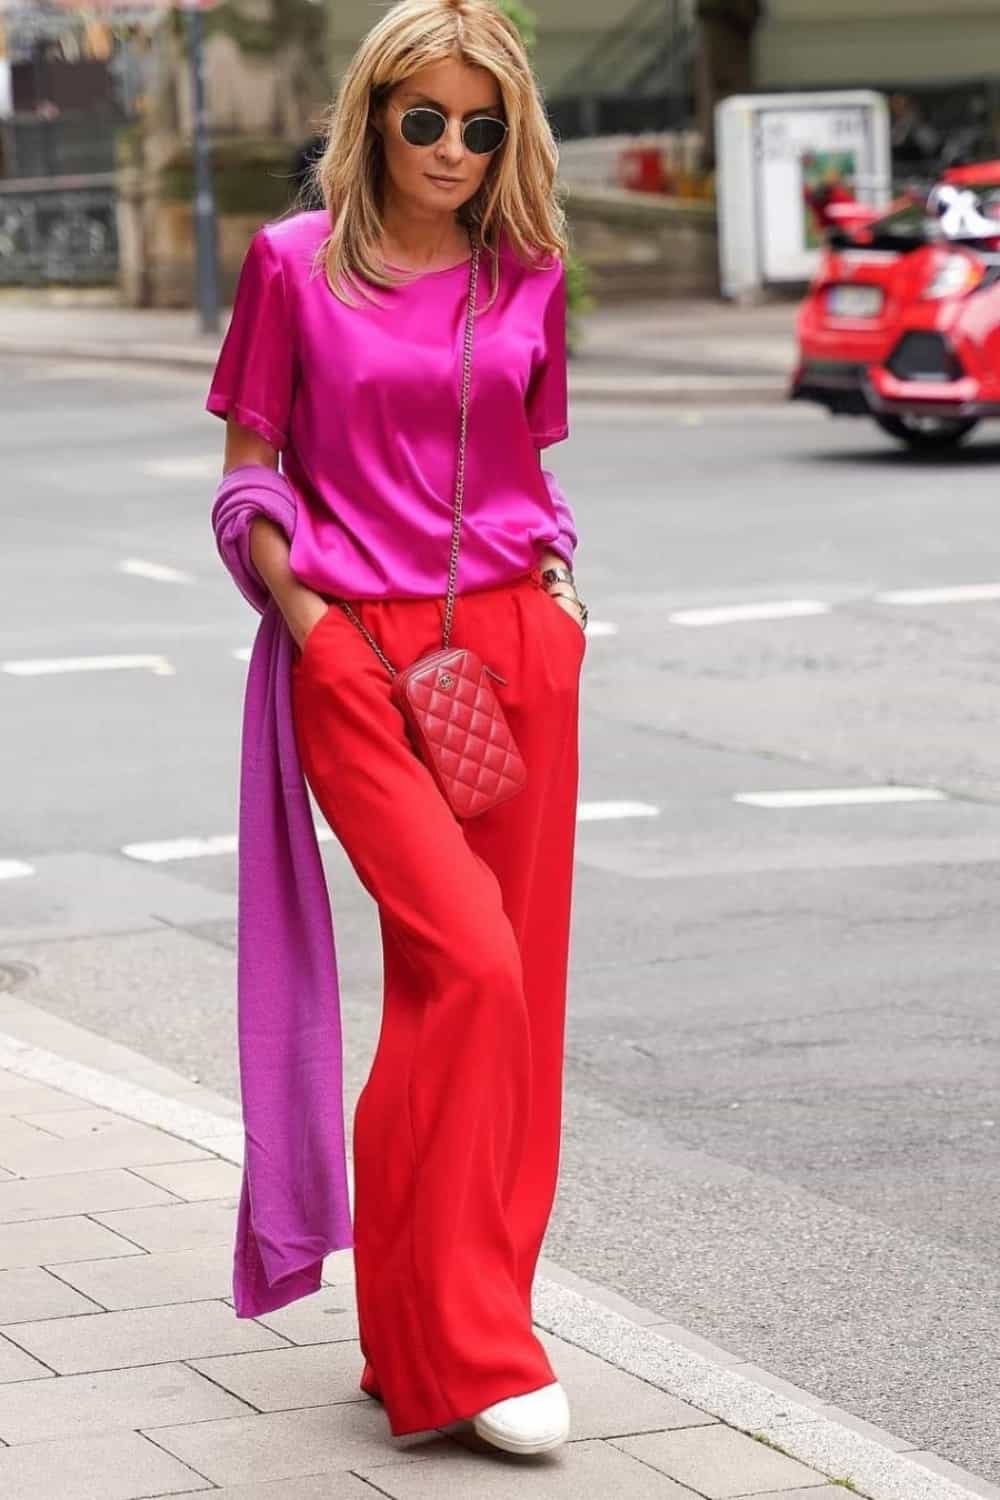 Red pants outfit with satin top